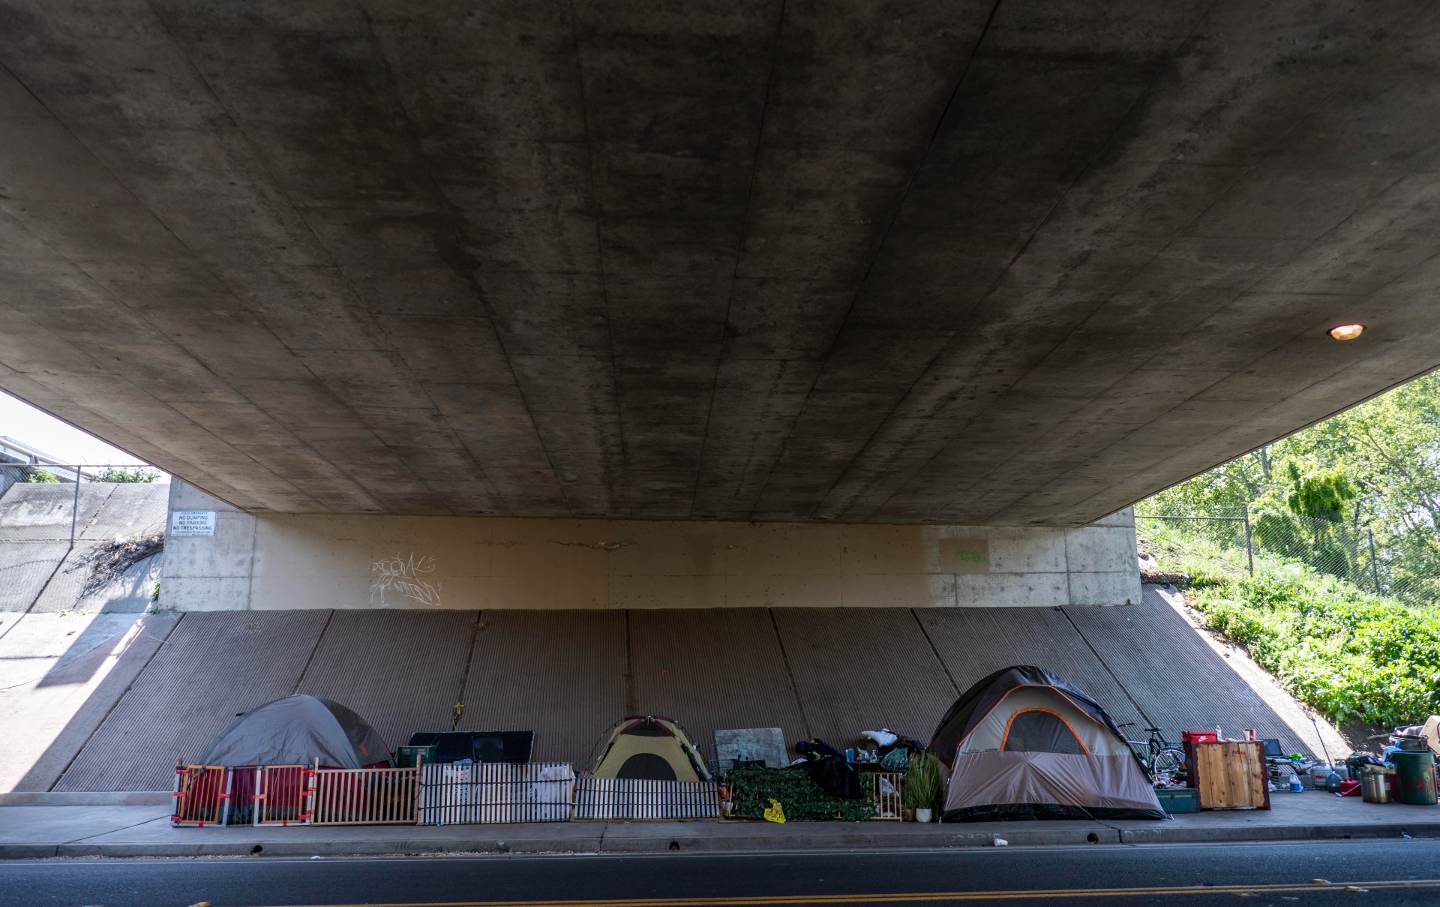 A homeless encampment of tents neatly sit underneath the I-5 freeway in Sacramento, Calif., on Sunday, April 3, 2022.